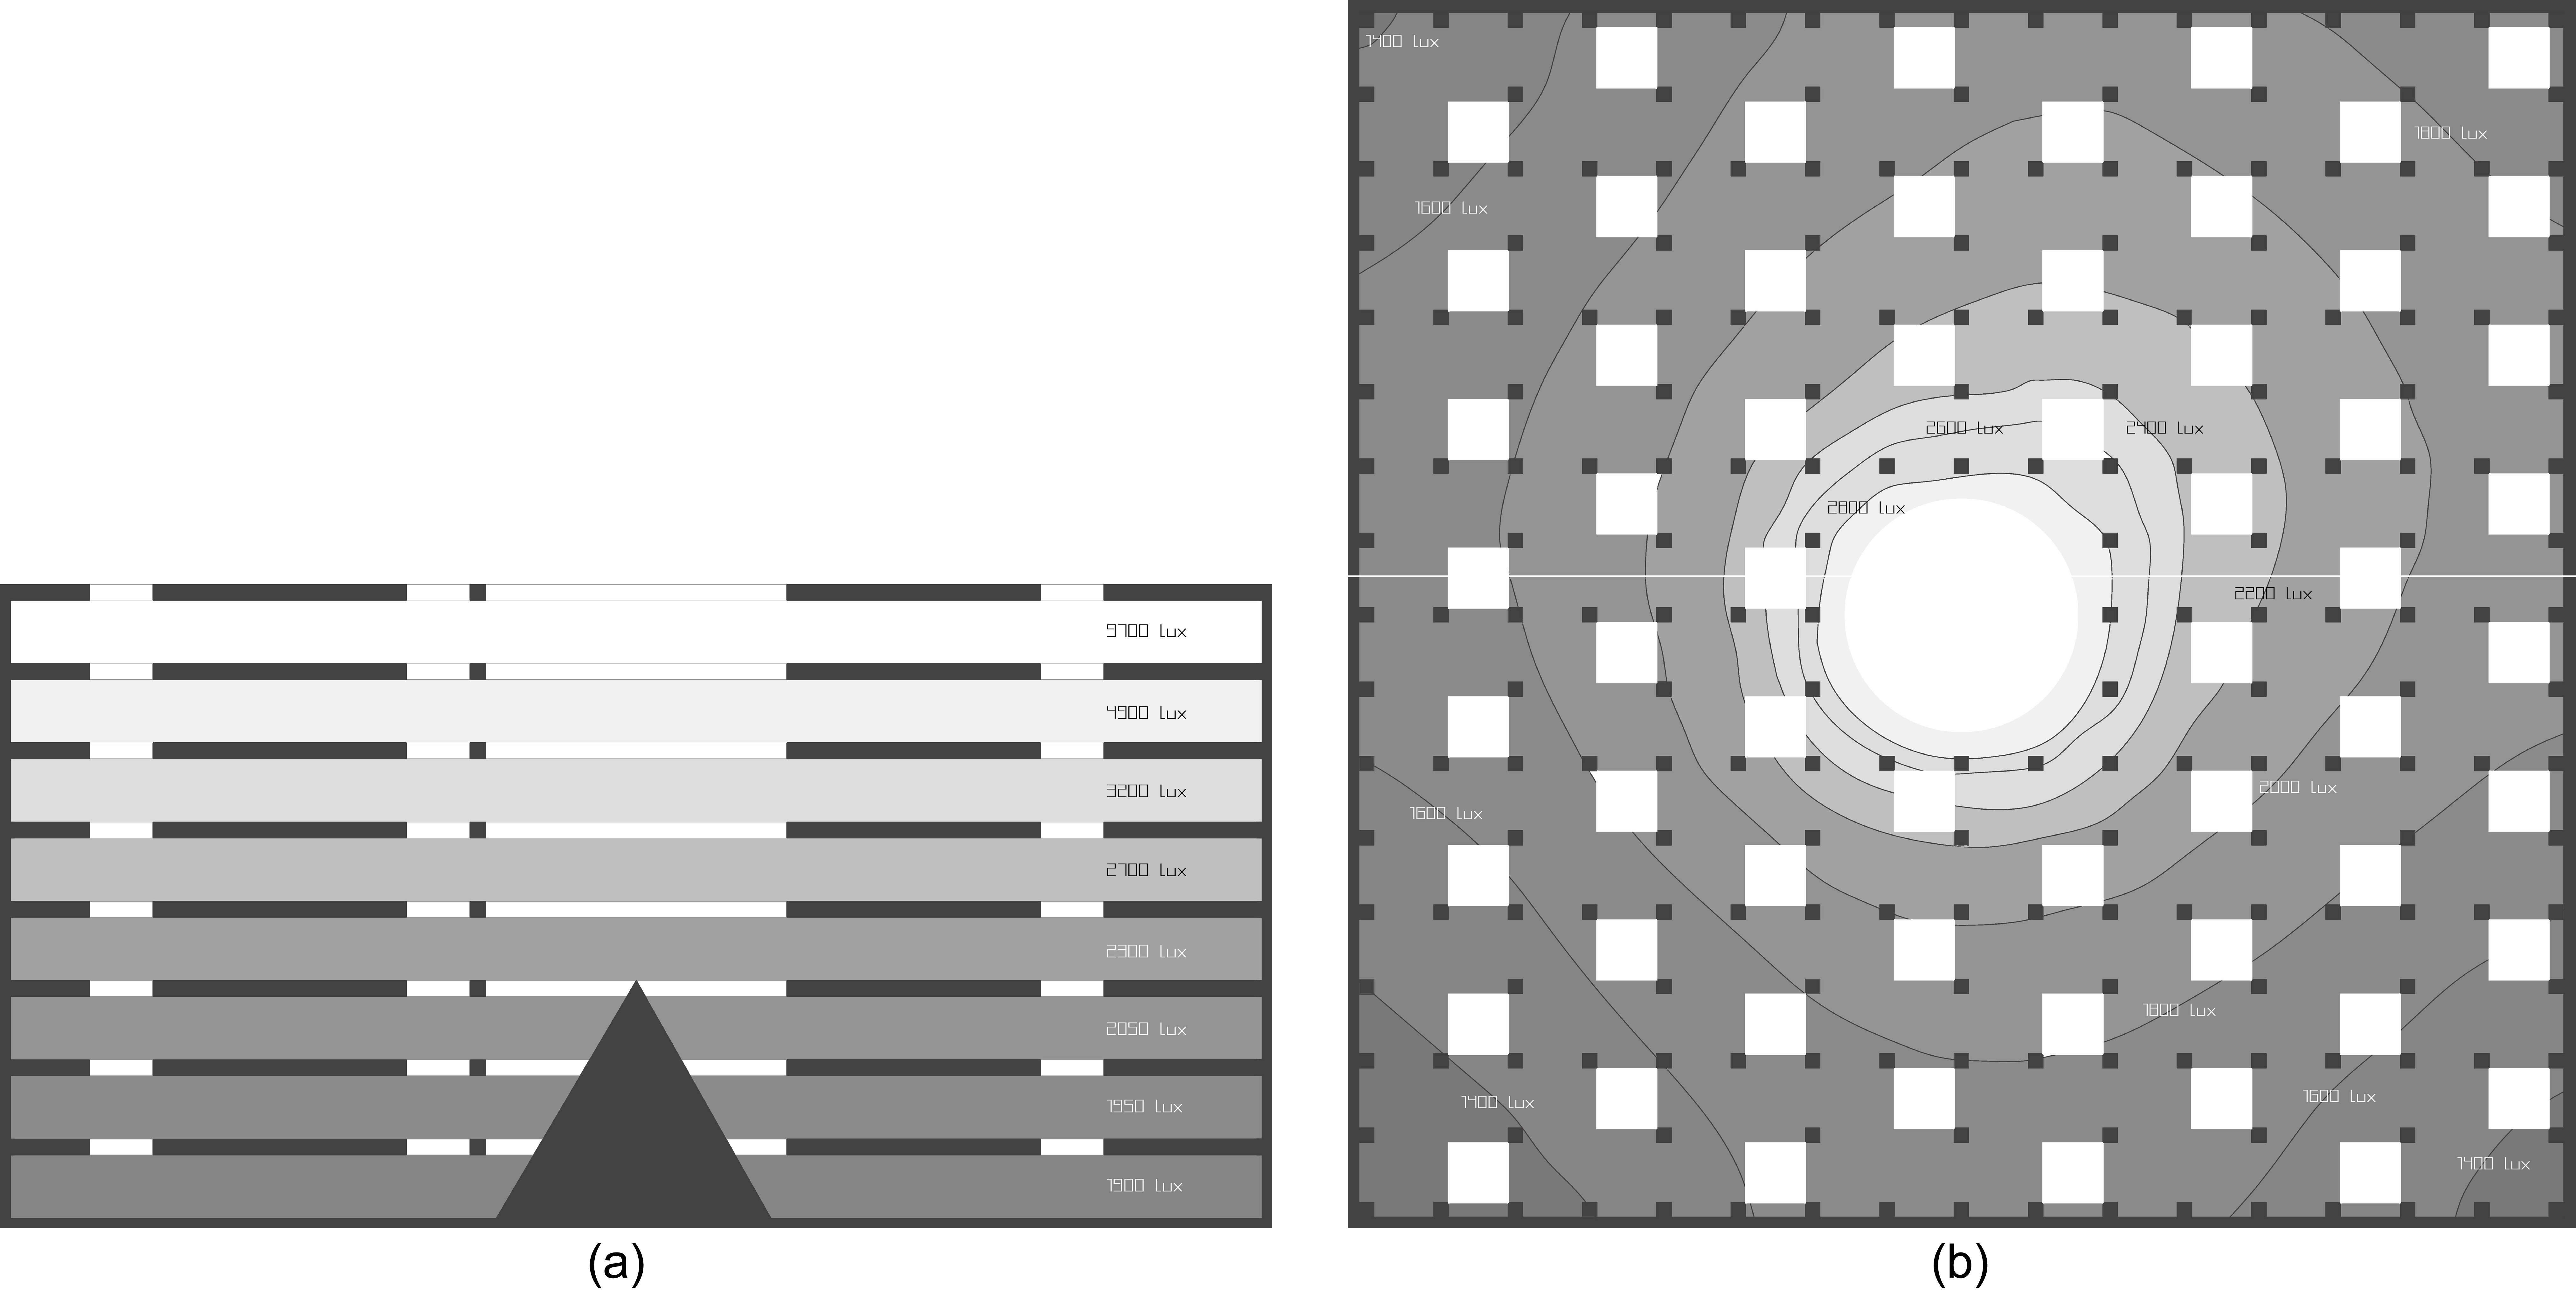 (a) average value per floor illuminance and (b) Isolux contour lines of the 1st level in Rome.